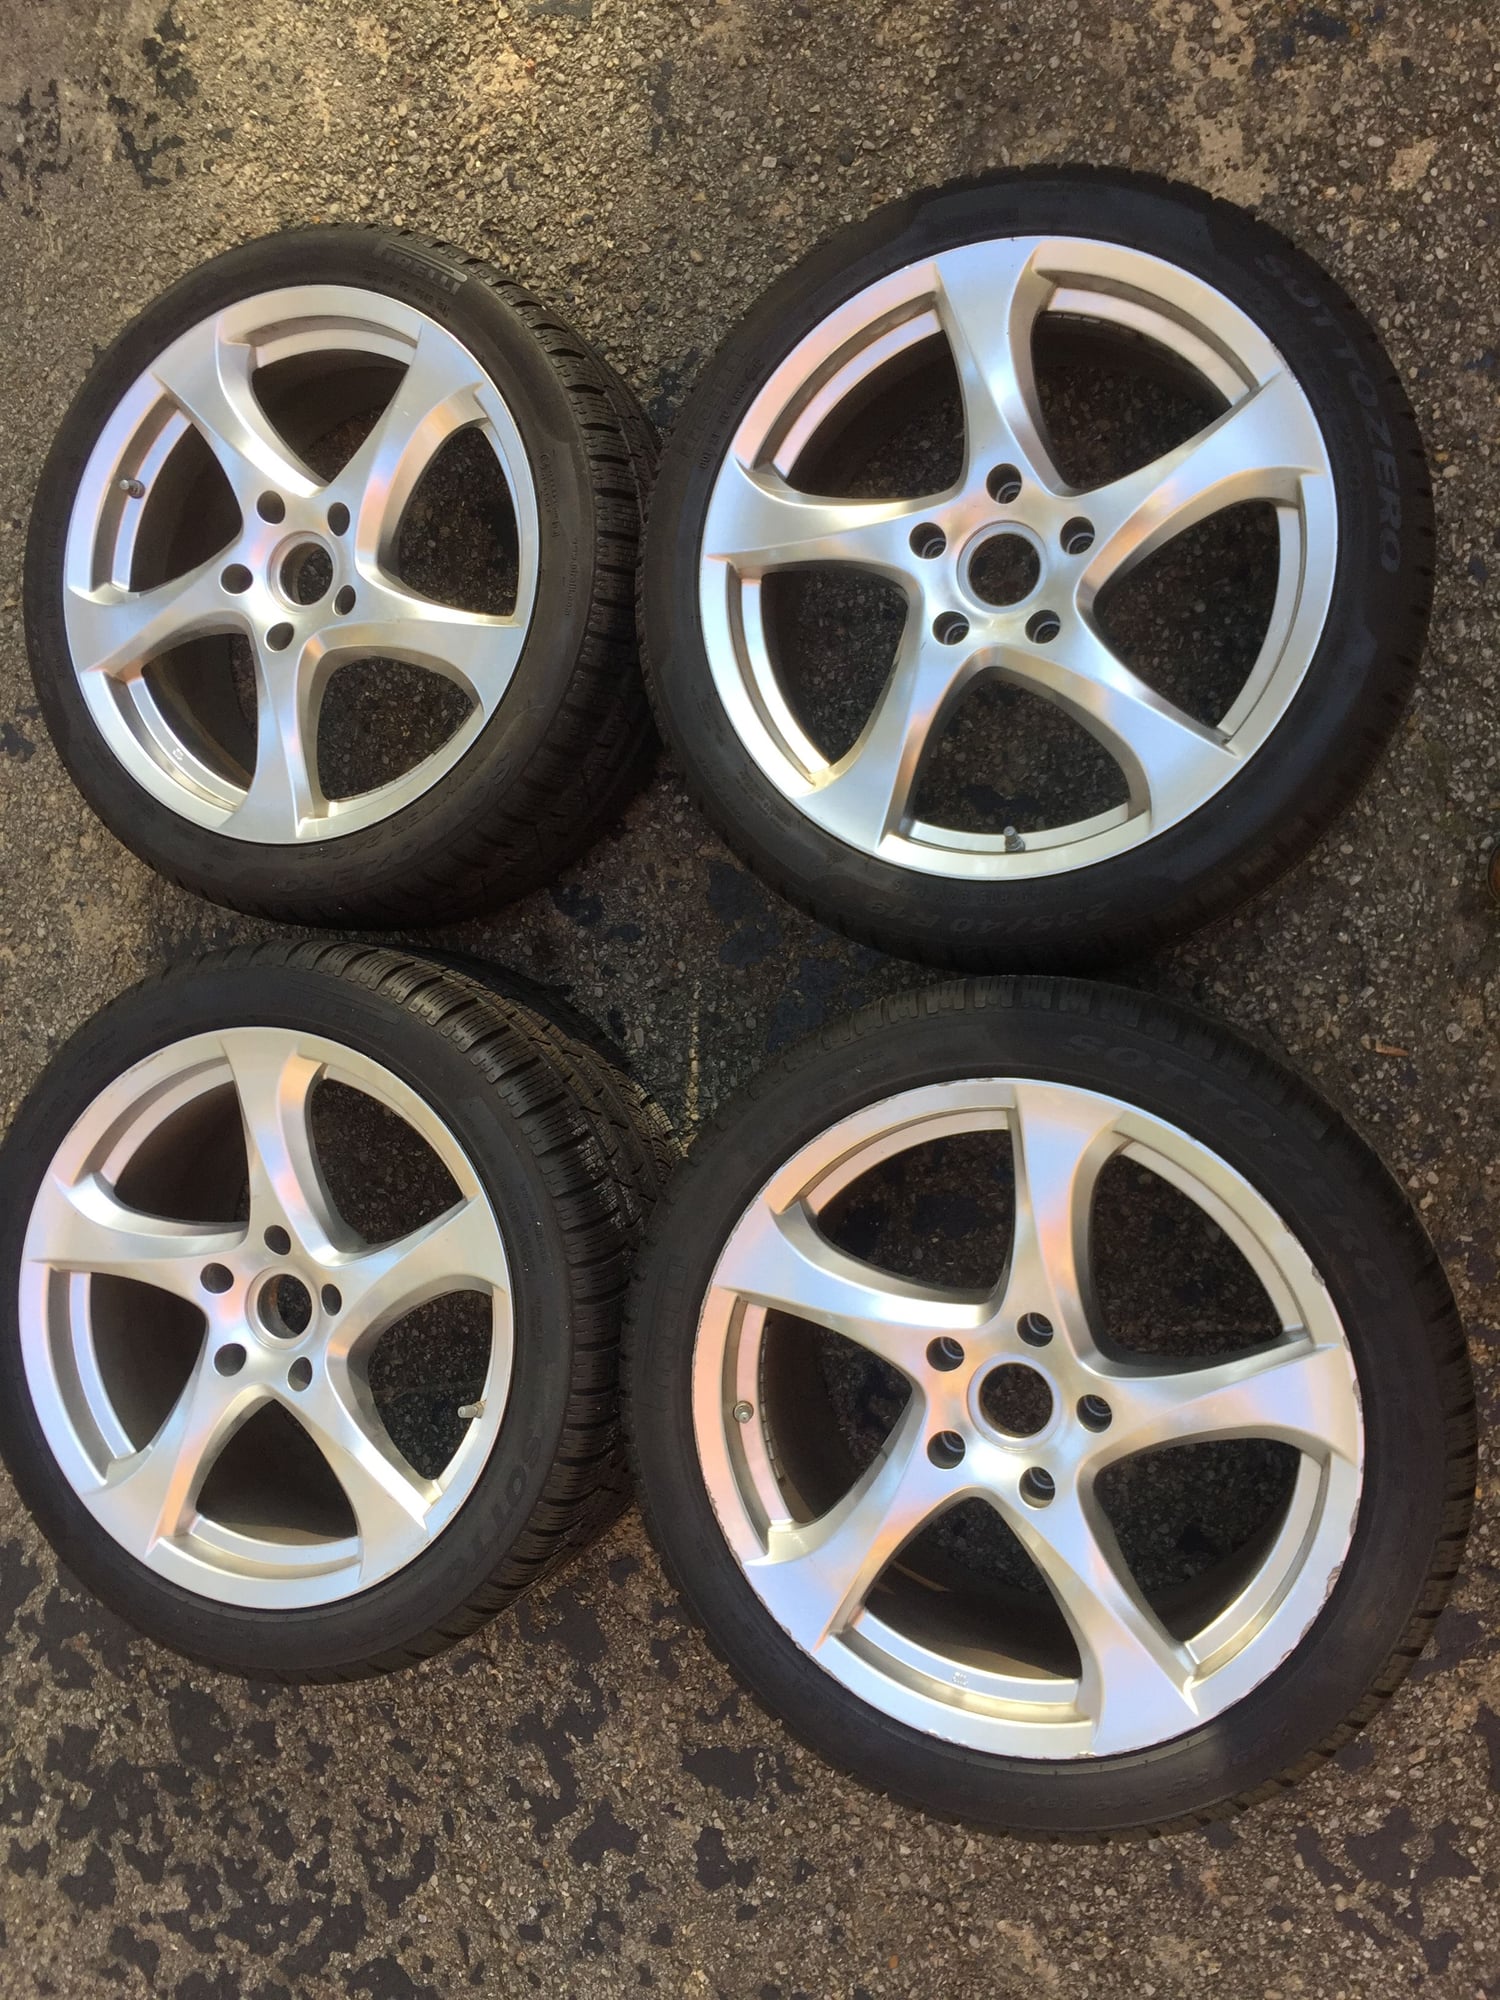 Wheels and Tires/Axles - Porsche winter wheels and tires - Used - 2006 to 2012 Porsche 911 - Hartford, WI 53027, United States